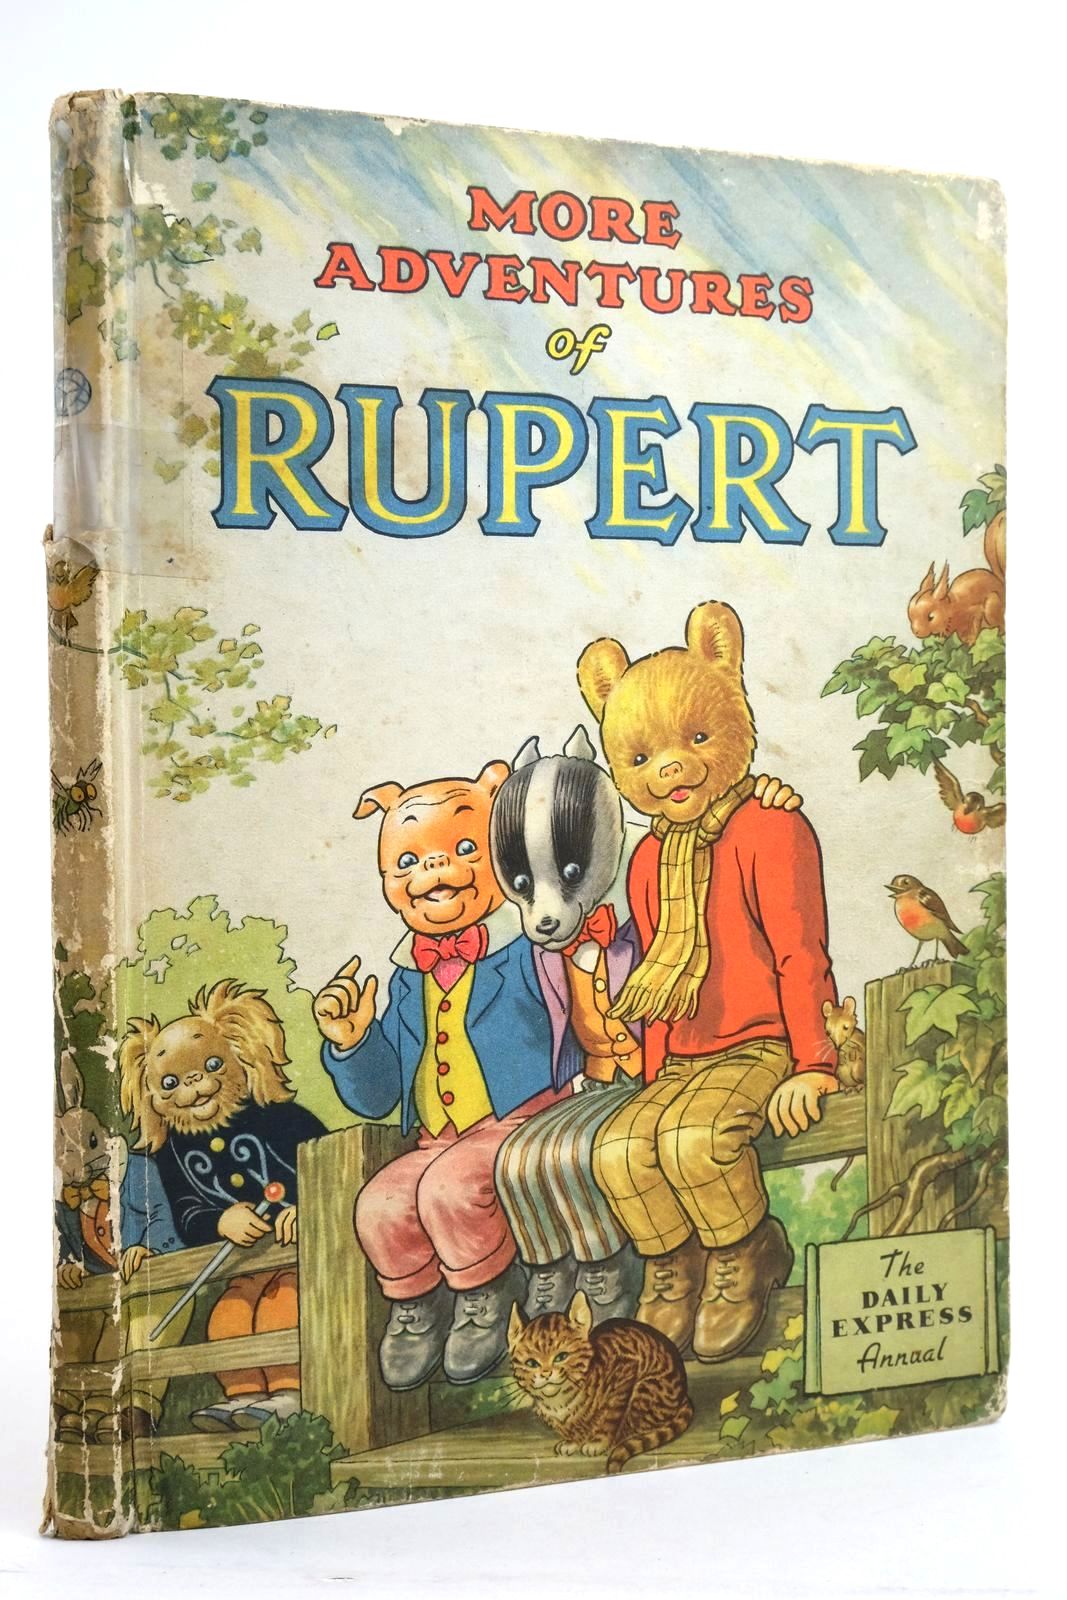 Photo of RUPERT ANNUAL 1953 - MORE ADVENTURES OF RUPERT- Stock Number: 2135862